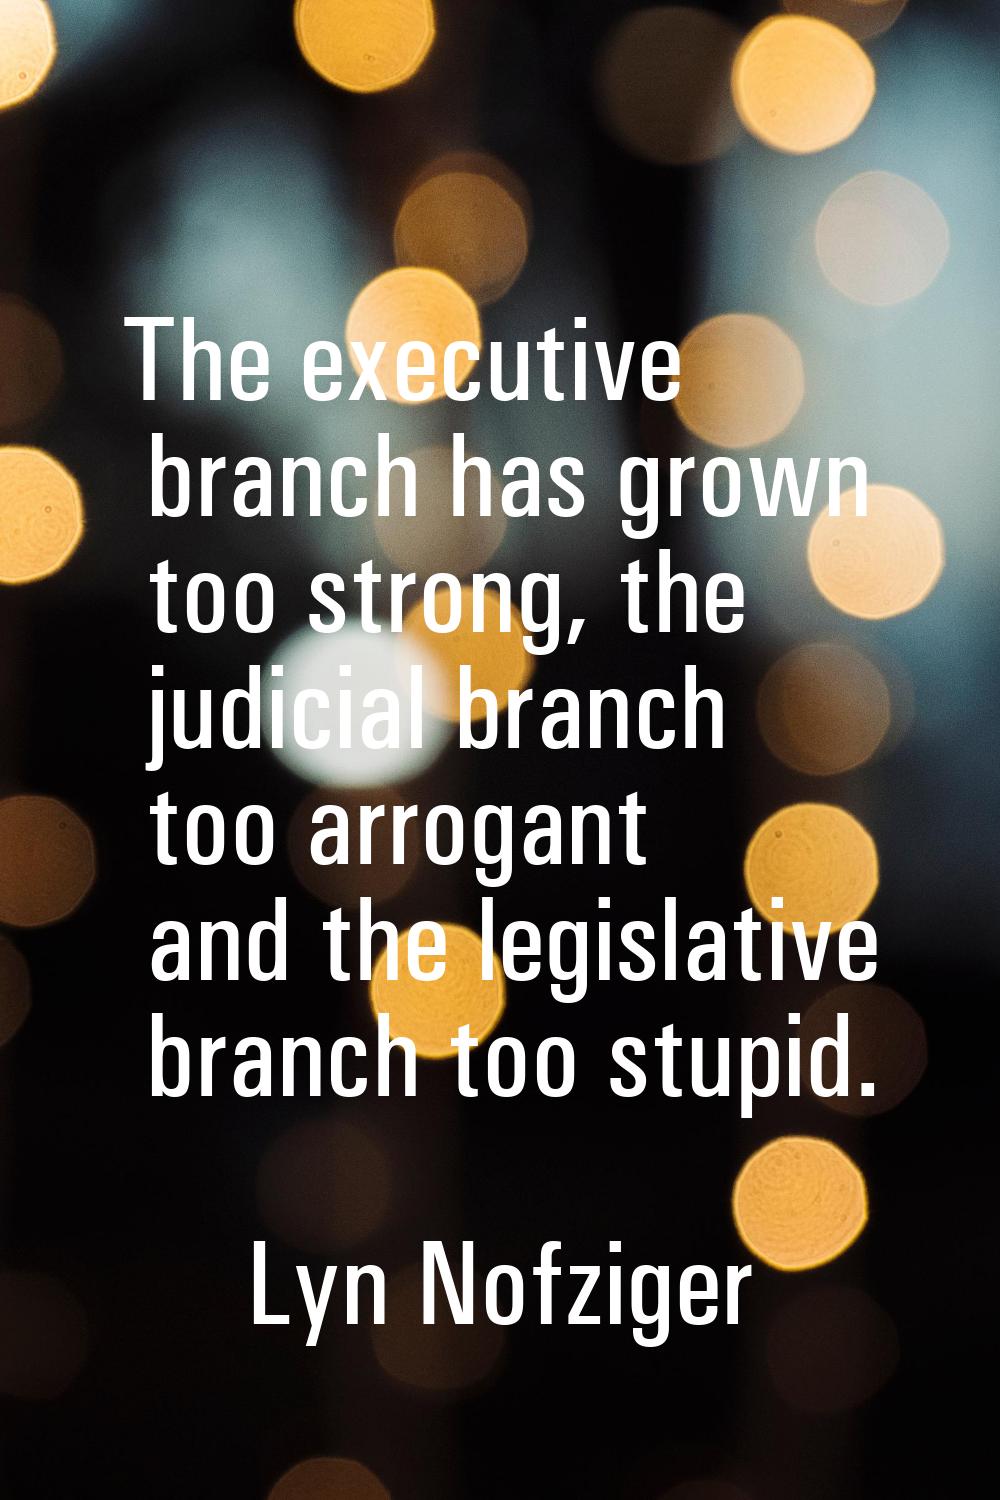 The executive branch has grown too strong, the judicial branch too arrogant and the legislative bra